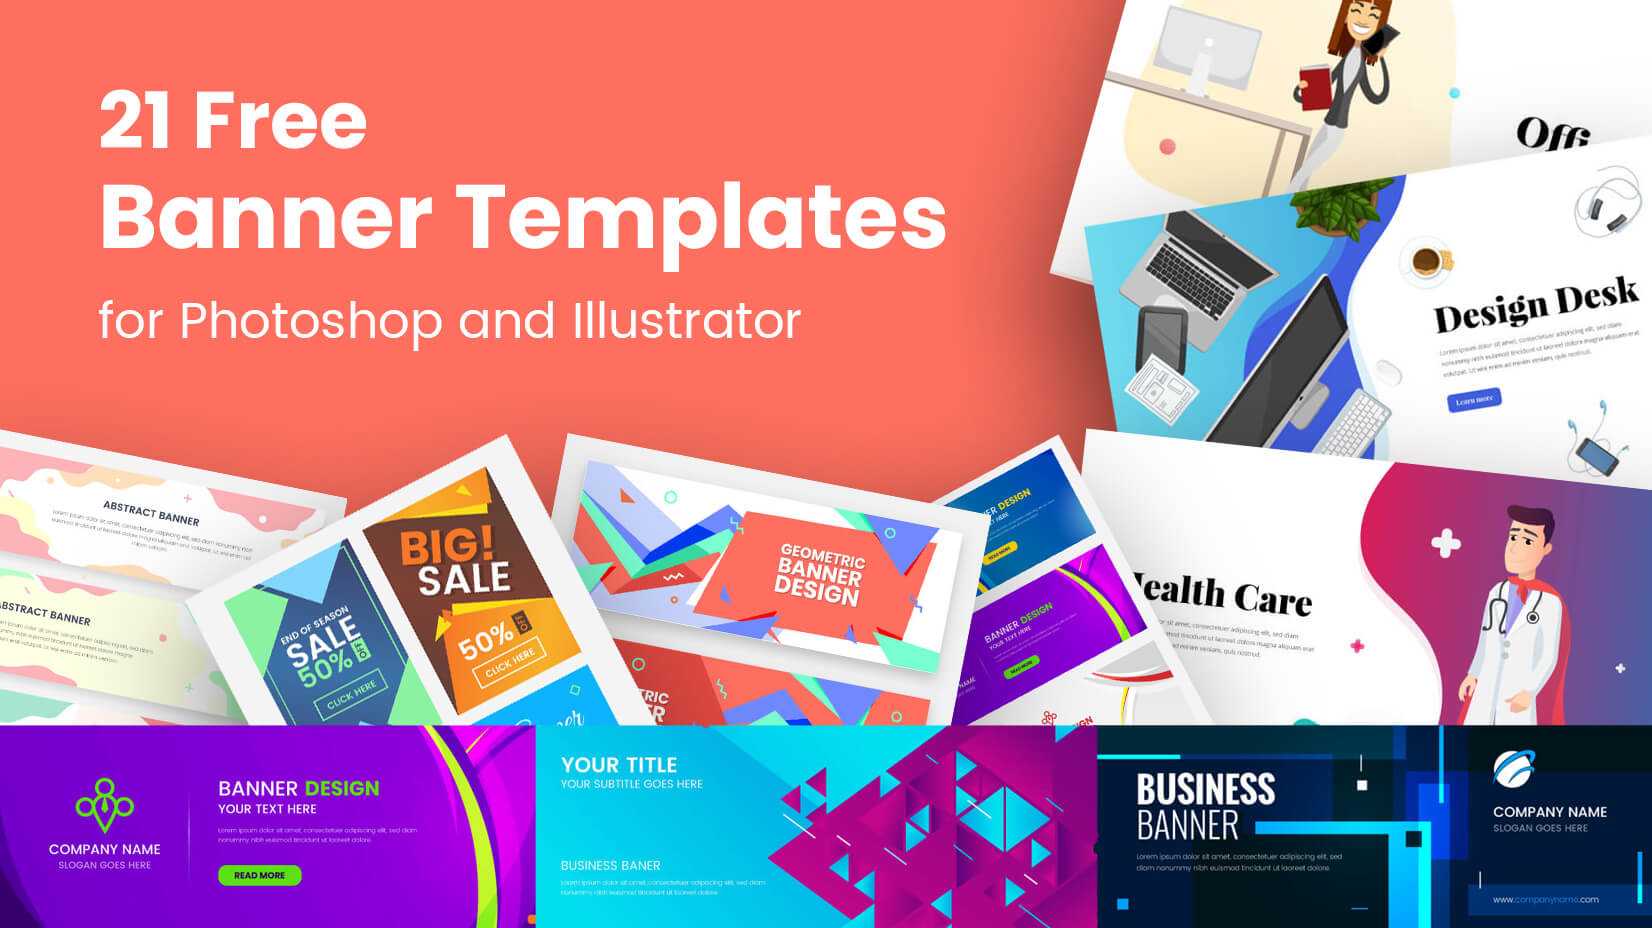 21 Free Banner Templates For Photoshop And Illustrator For Vinyl Banner Design Templates